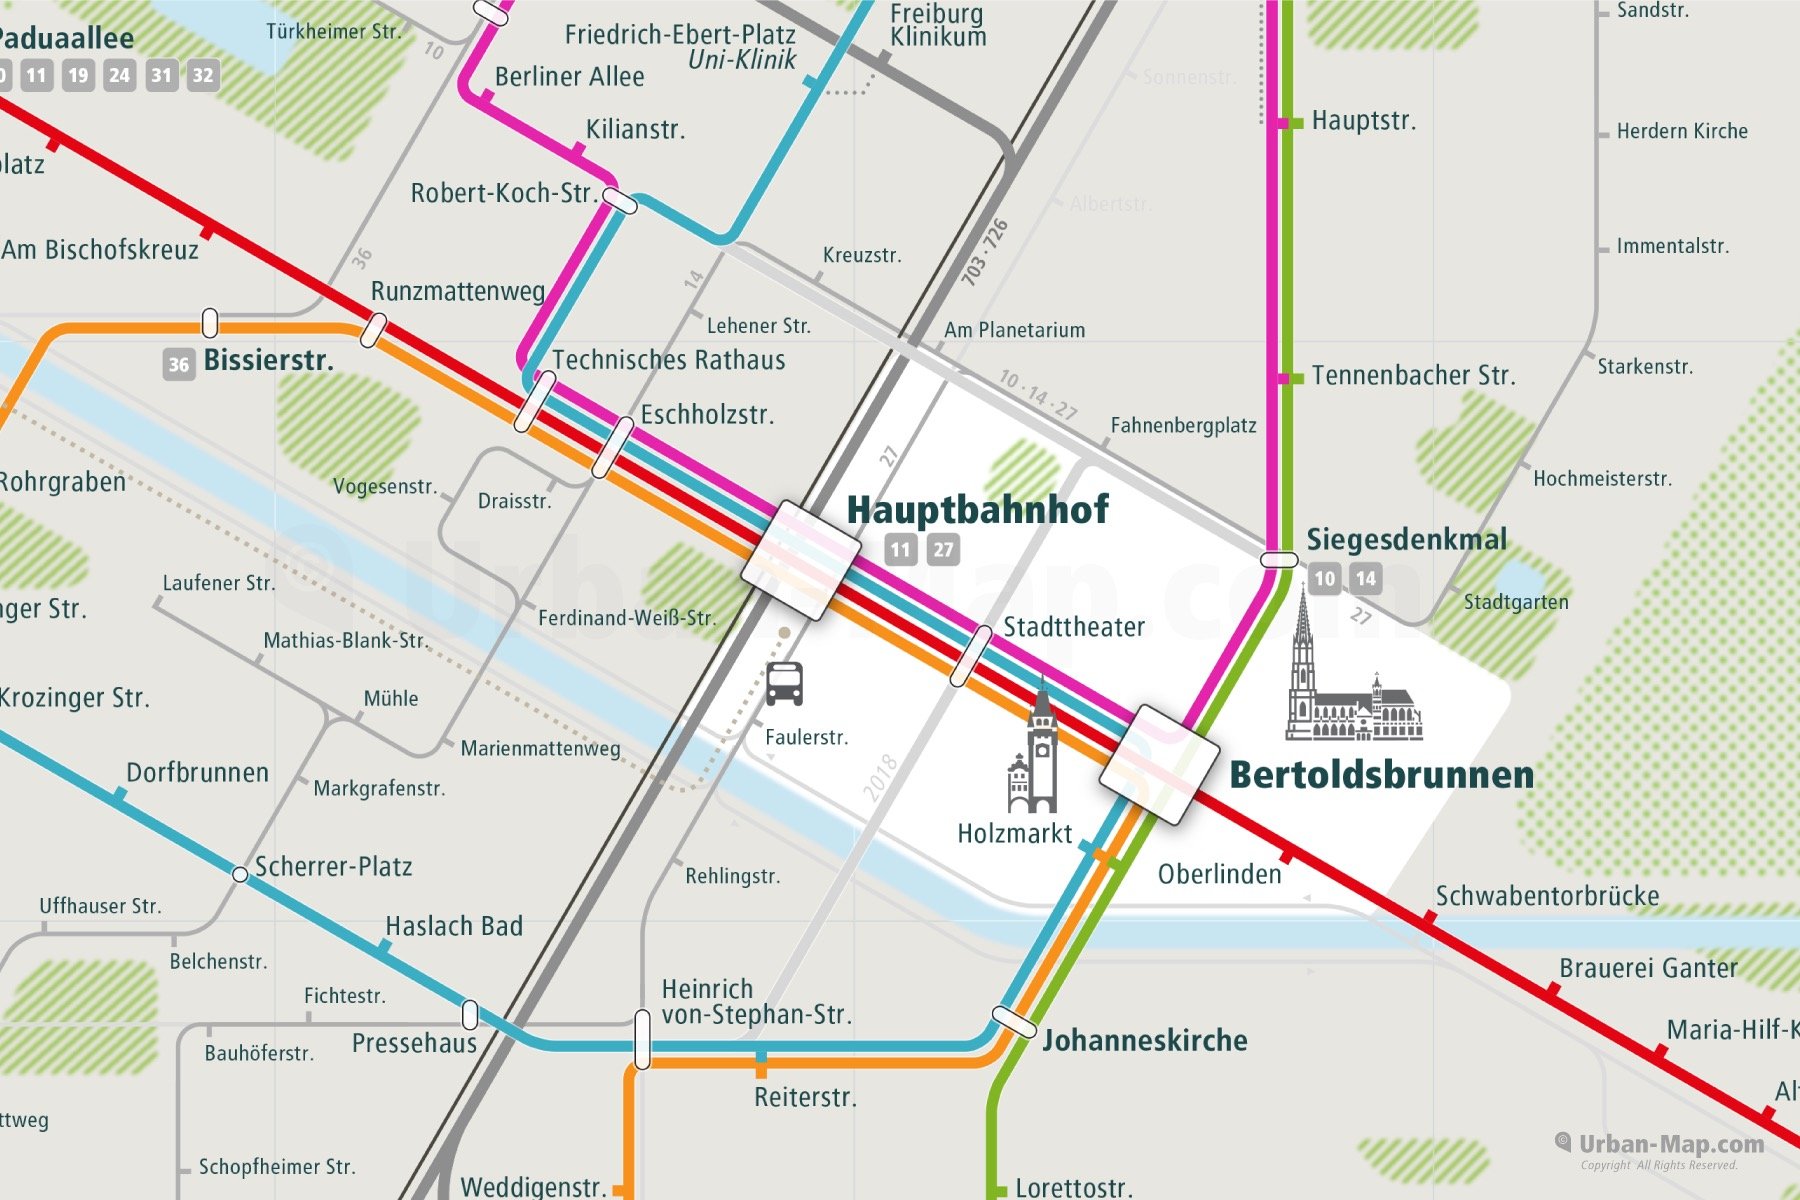 Freiburg City Rail Map shows the train and public transportation routes of tram, bus - Close-Up